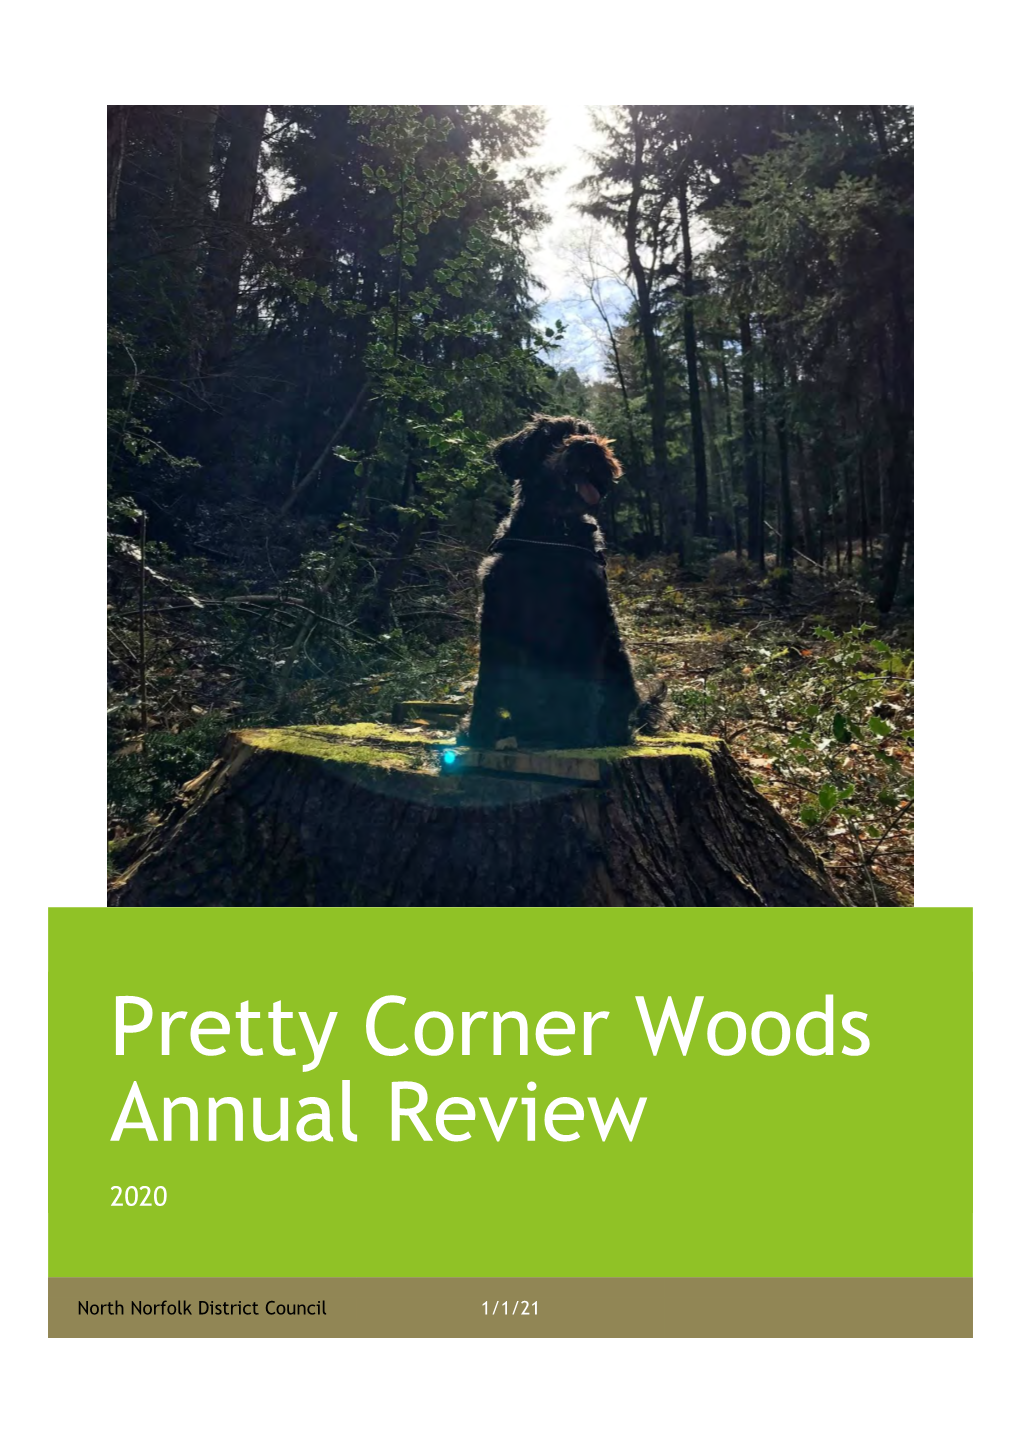 Pretty Corner Woods Annual Review 2020